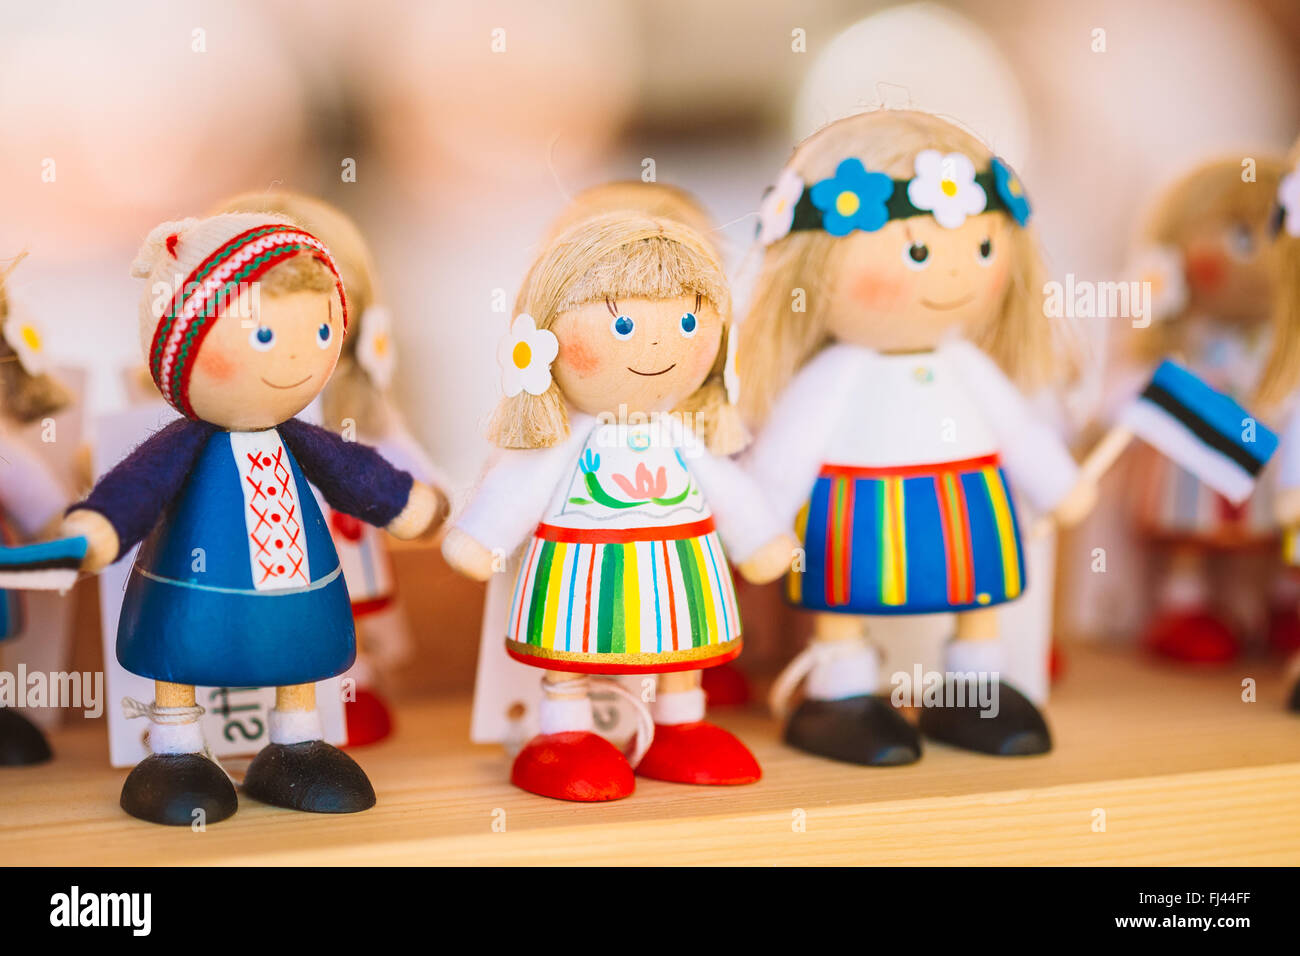 Colorful Estonian Wooden Dolls At market. Dolls Are The Most Popular Souvenirs From Tallinn And Symbol Of Country's Culture. Est Stock Photo